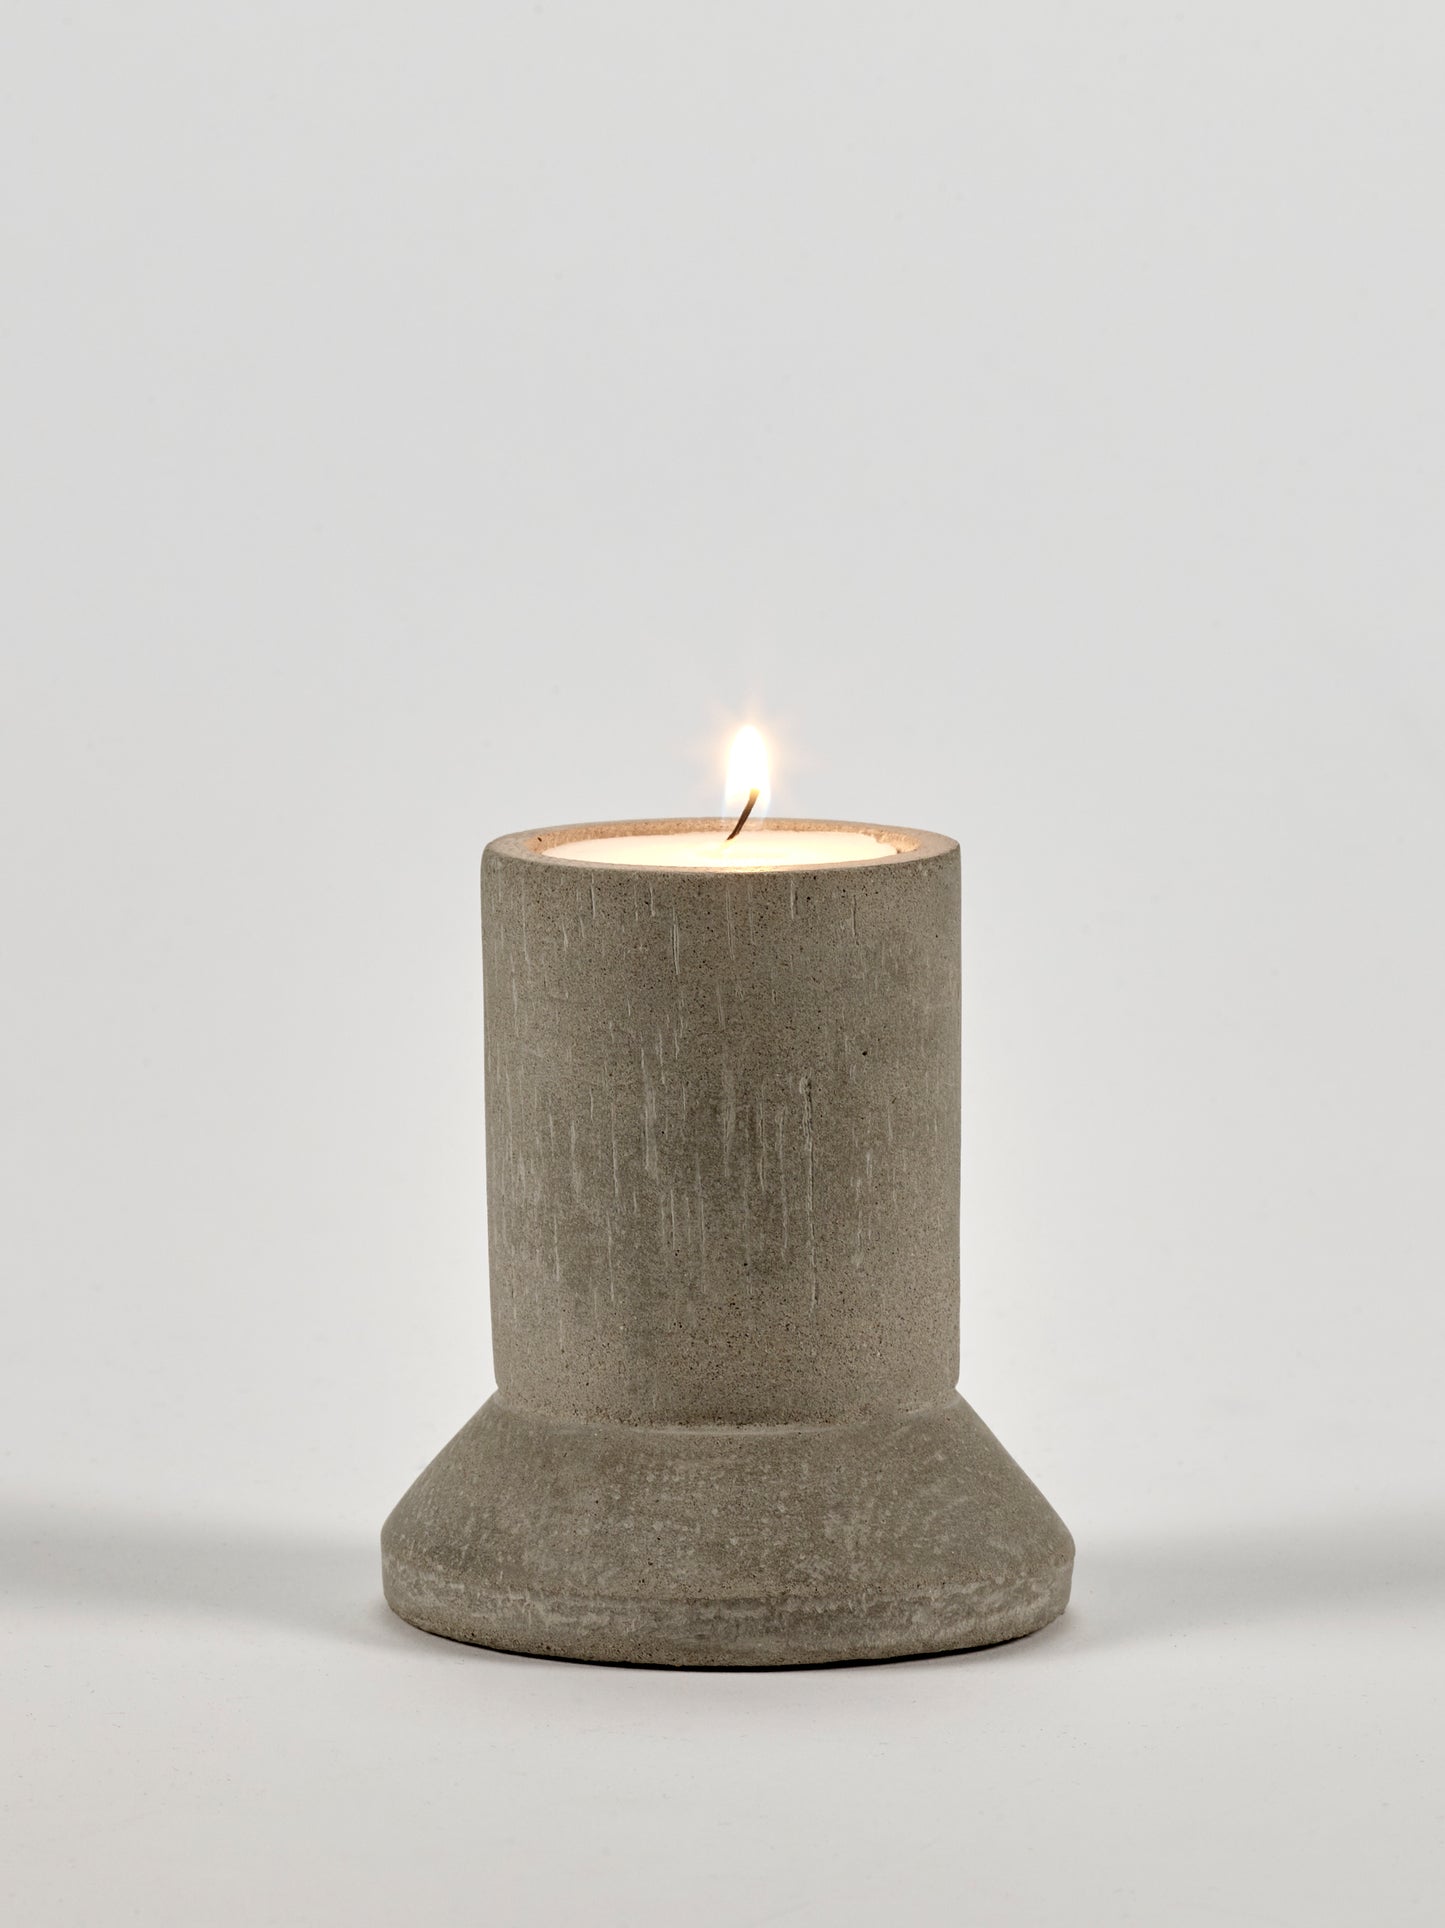 The Medium Tower Candle Holder